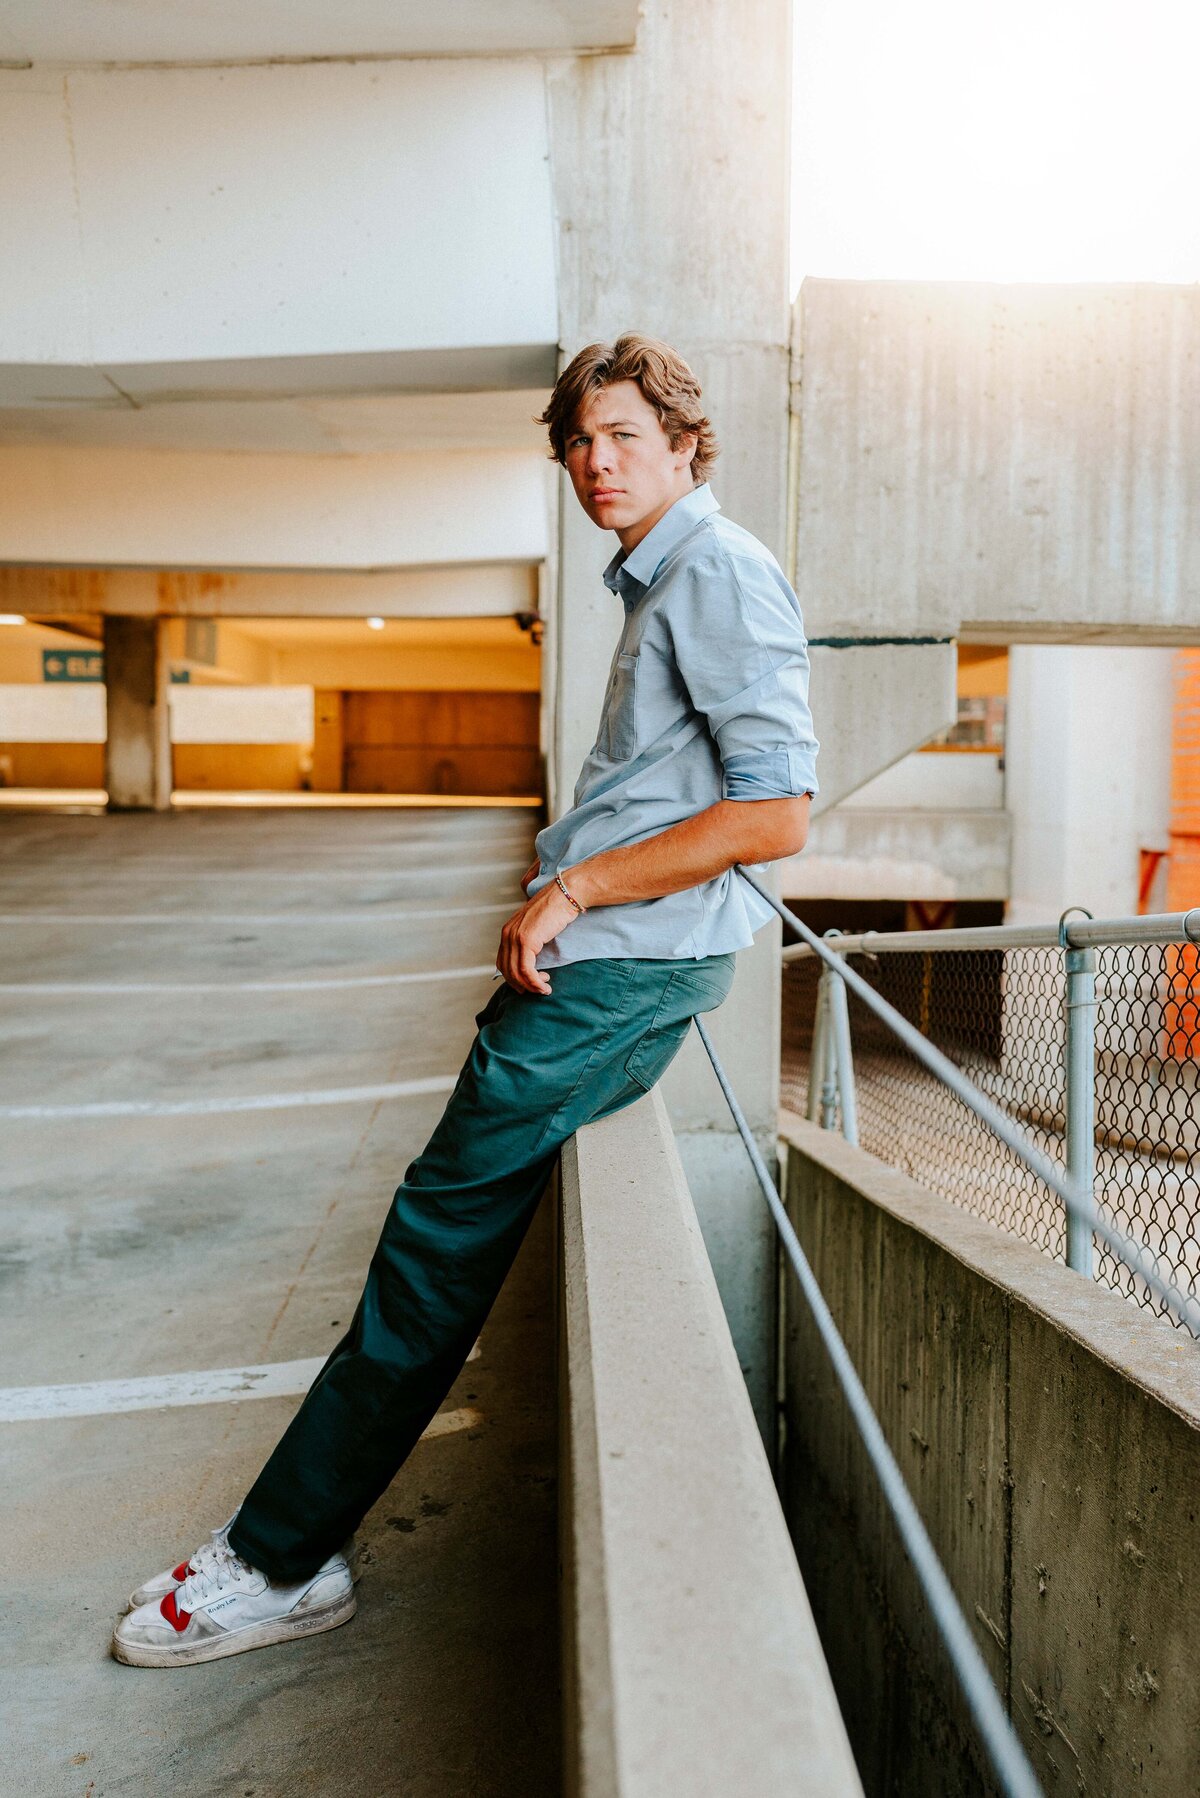 In the heart of Minneapolis, this striking senior portrait features an Edina High School graduate leaning confidently against a railing on a downtown parking garage. With leading lines creating a dramatic perspective, he gazes directly into the camera, capturing the essence of a young graduate ready to embrace the city's opportunities.